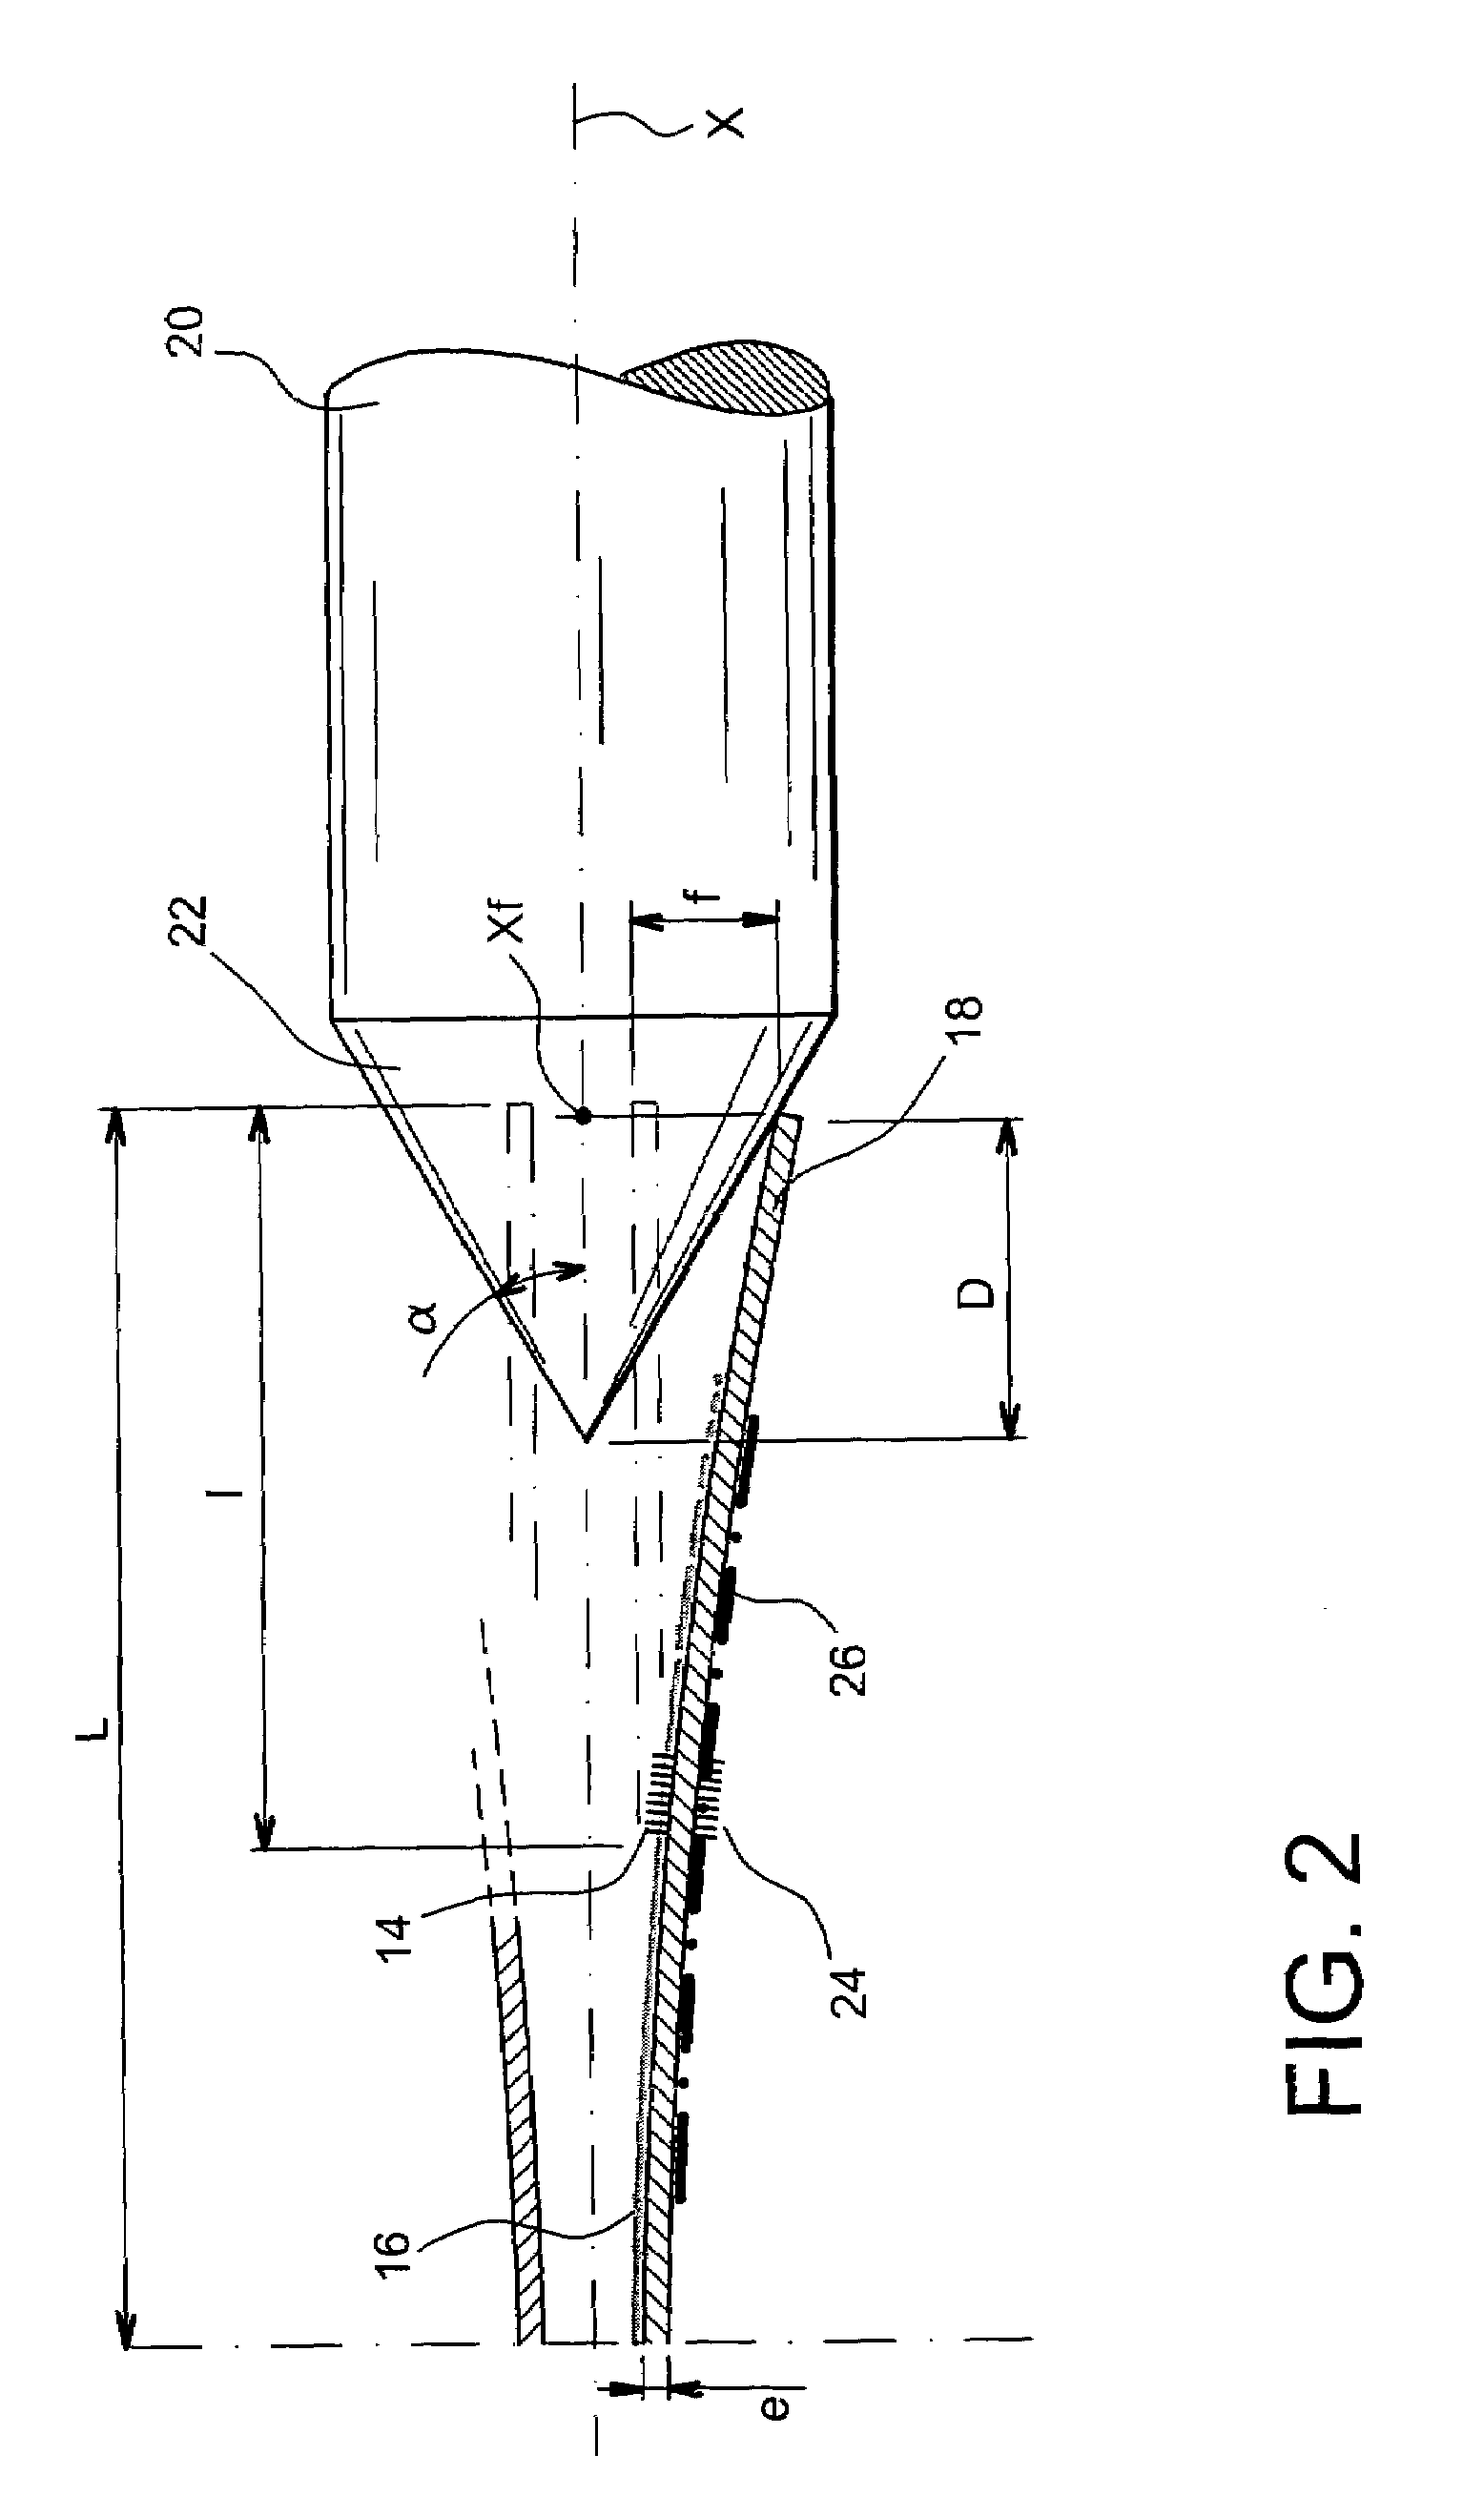 Extensometer comprising a flexible sensing element and Bragg gratings